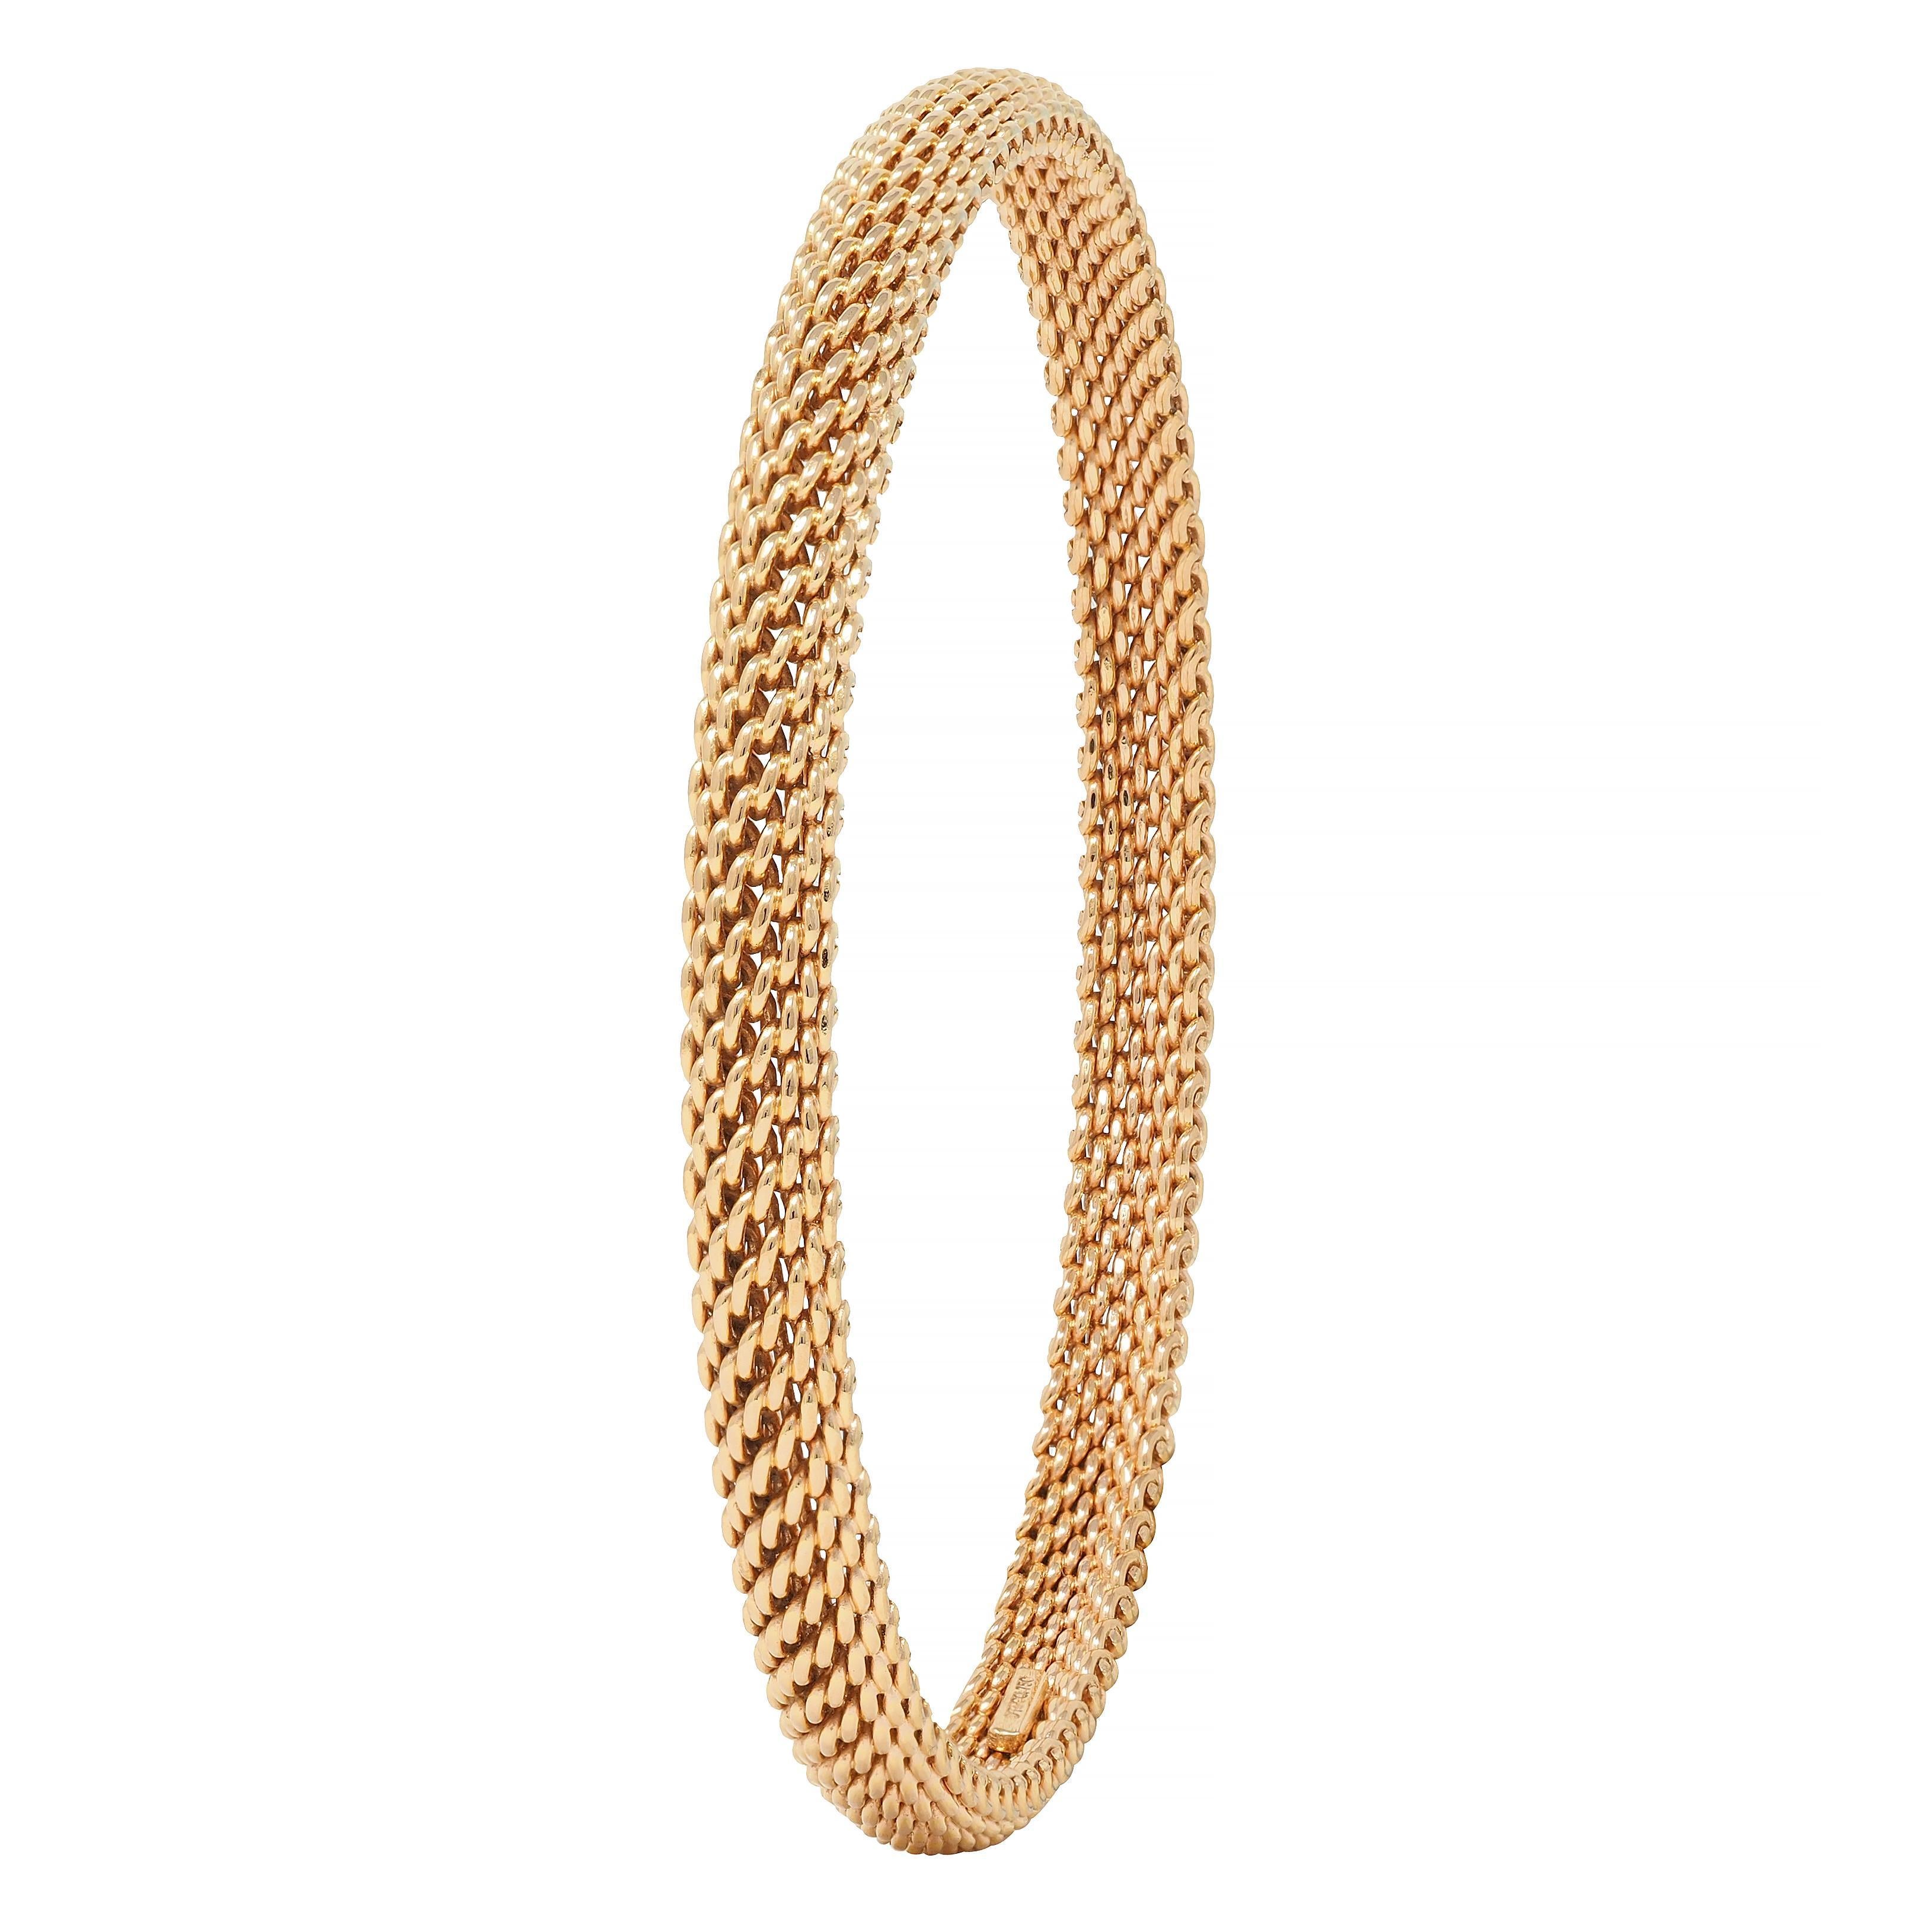 Tiffany & Co. 18 Karat Rose Gold Woven Mesh Somerset Bangle Bracelet In Excellent Condition For Sale In Philadelphia, PA